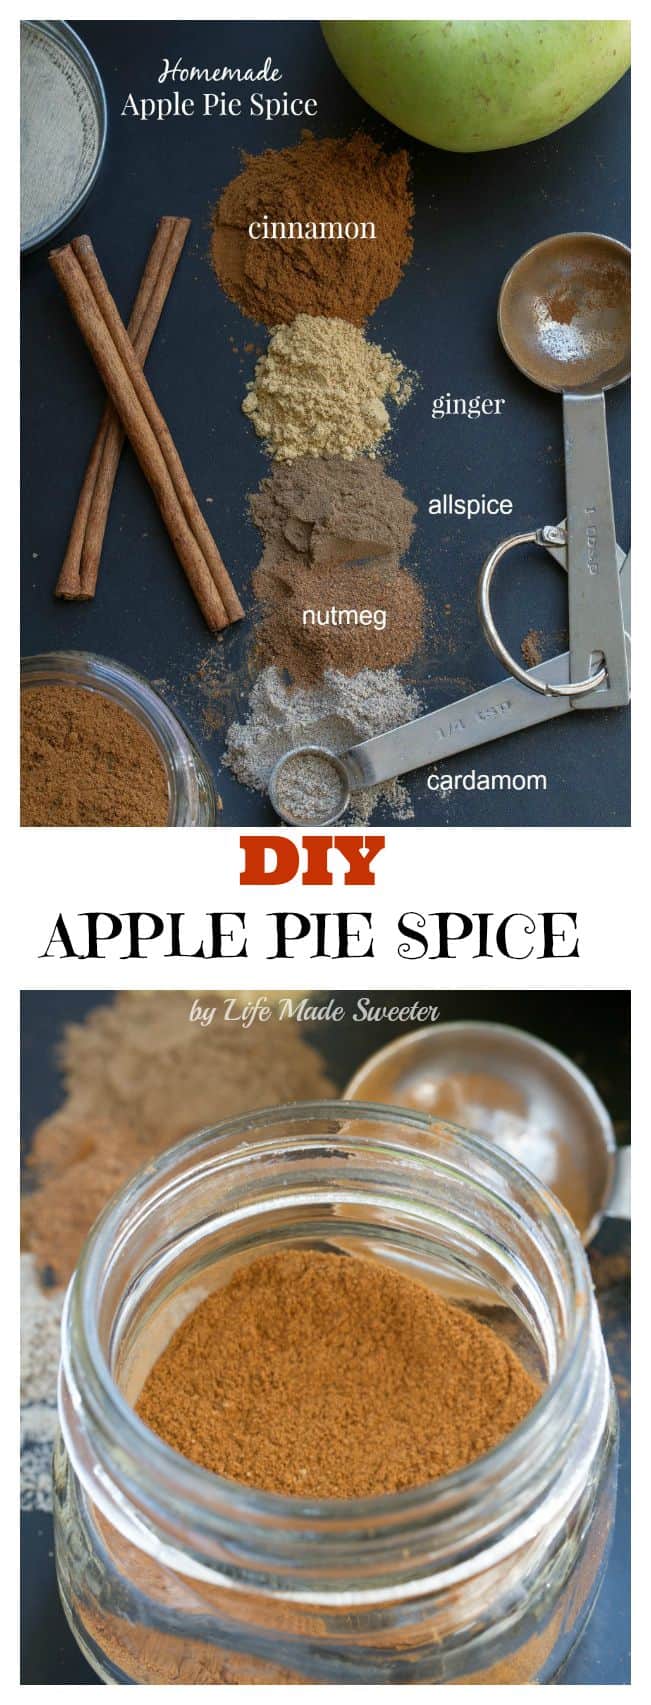 Homemade Apple Pie Spice - make your ave own DIY custom blend & you can save money and a trip to the store for make plenty of pies all season long!